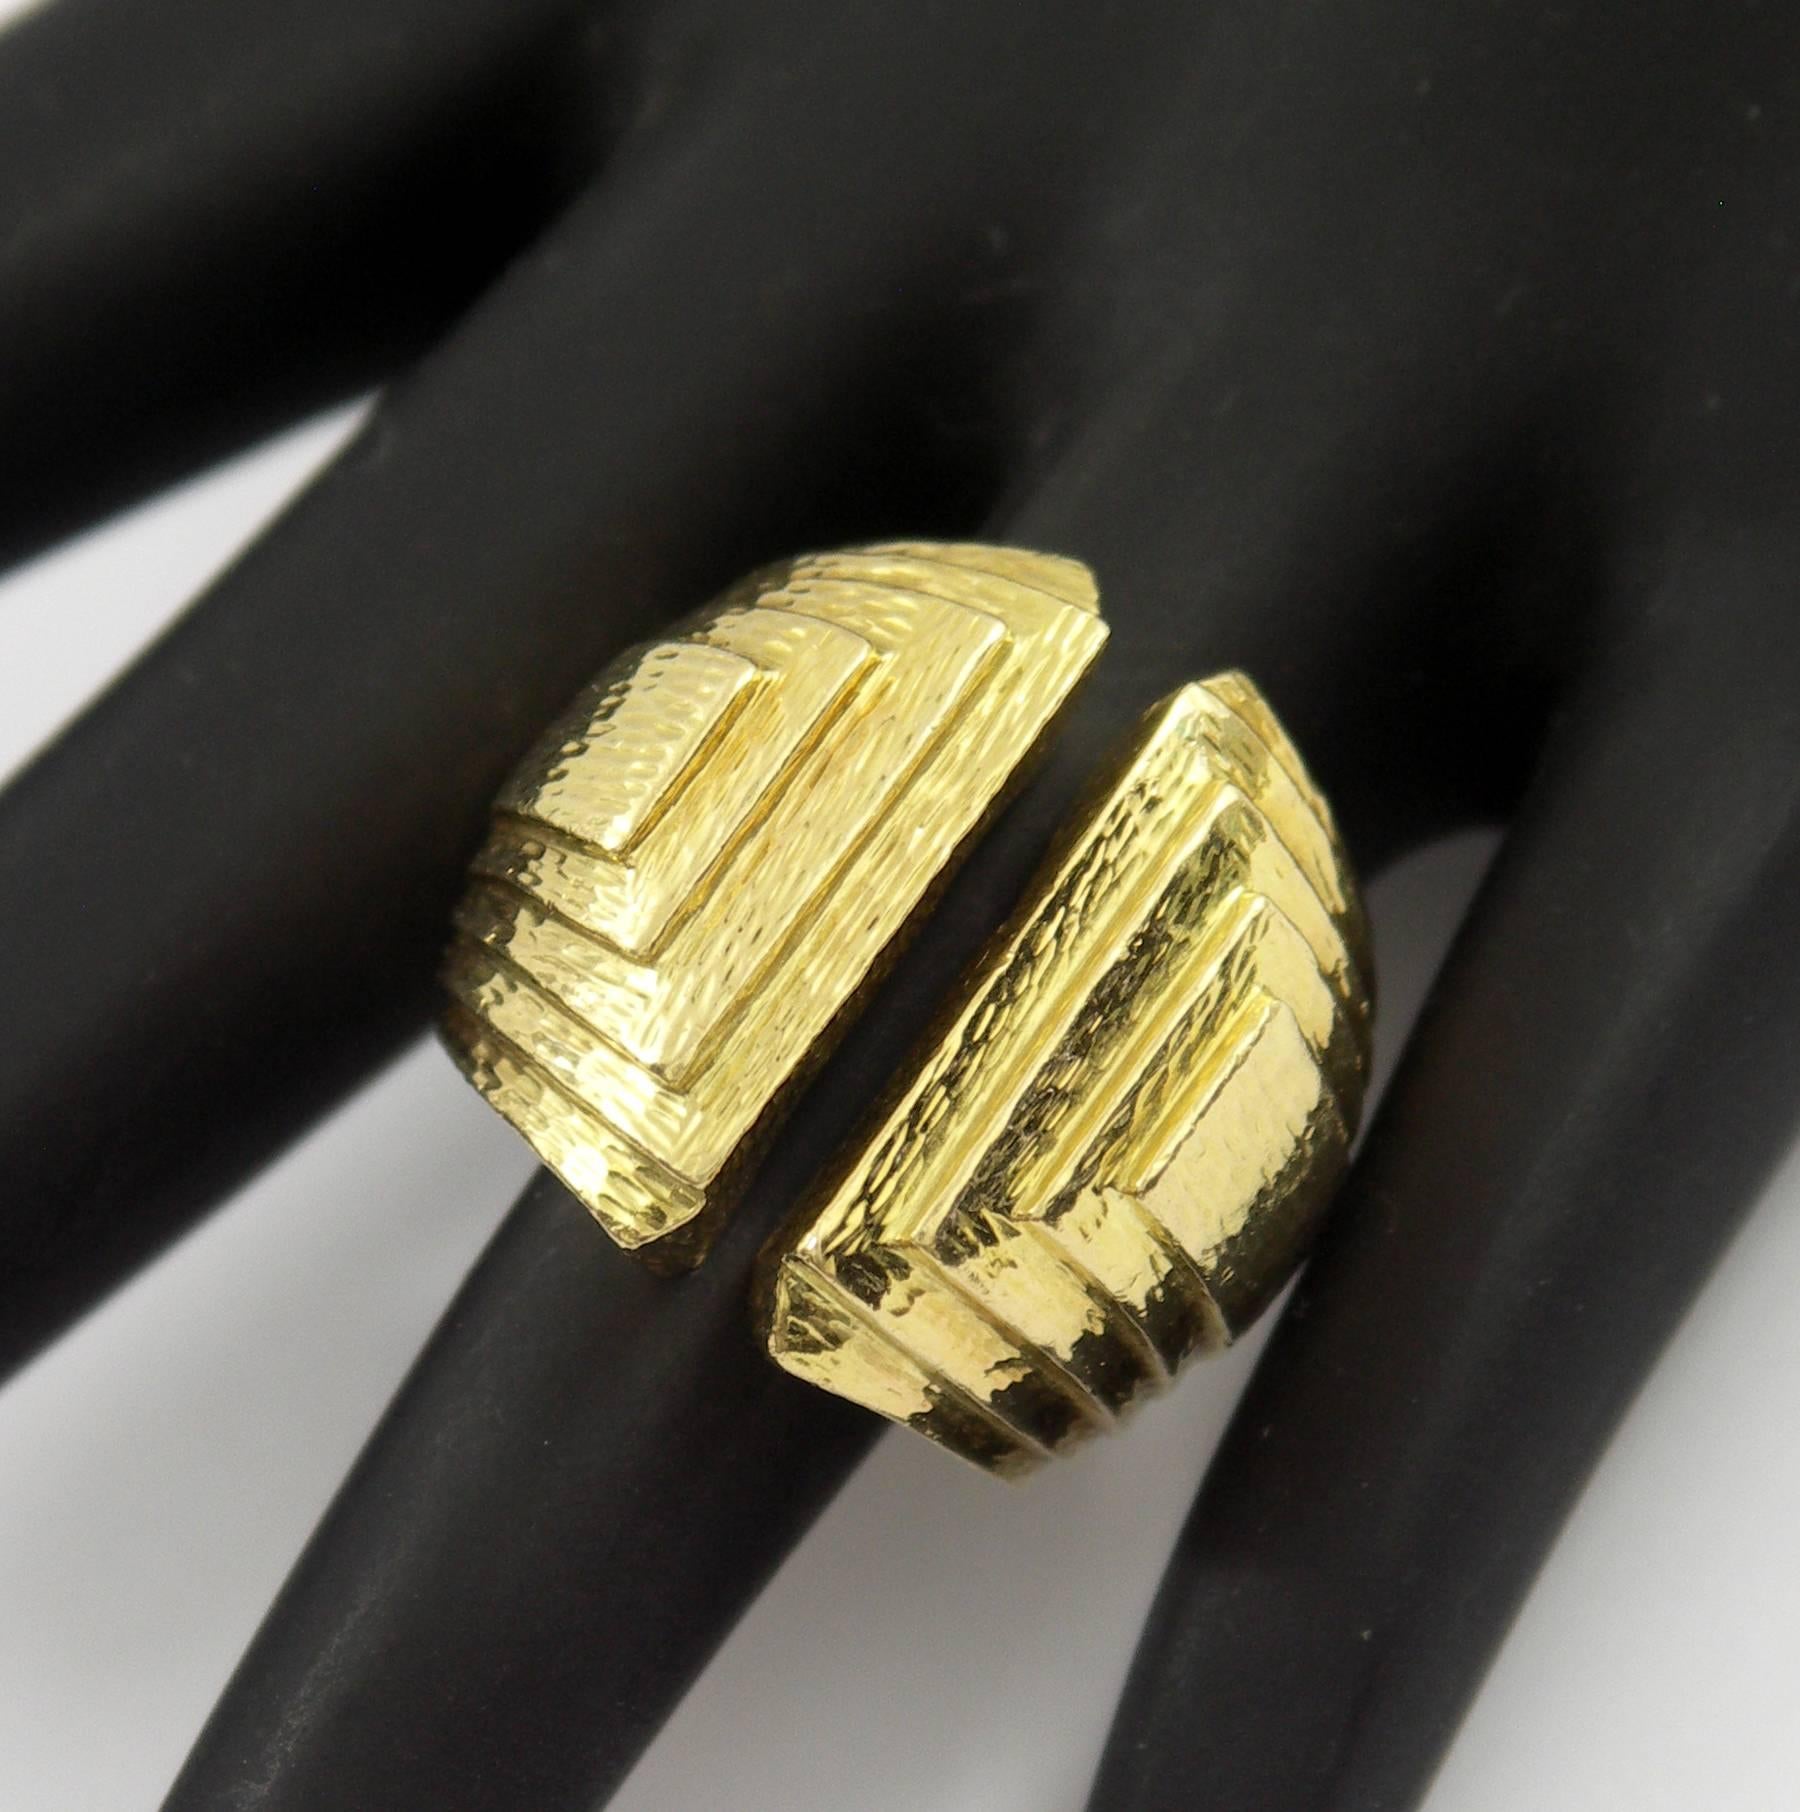 A split front band in 18K yellow gold, by David Webb, featuring five levels of hammered gold. This ring is a size 6 and tapers in width from 7/8 of an inch down to 1/4 inch.